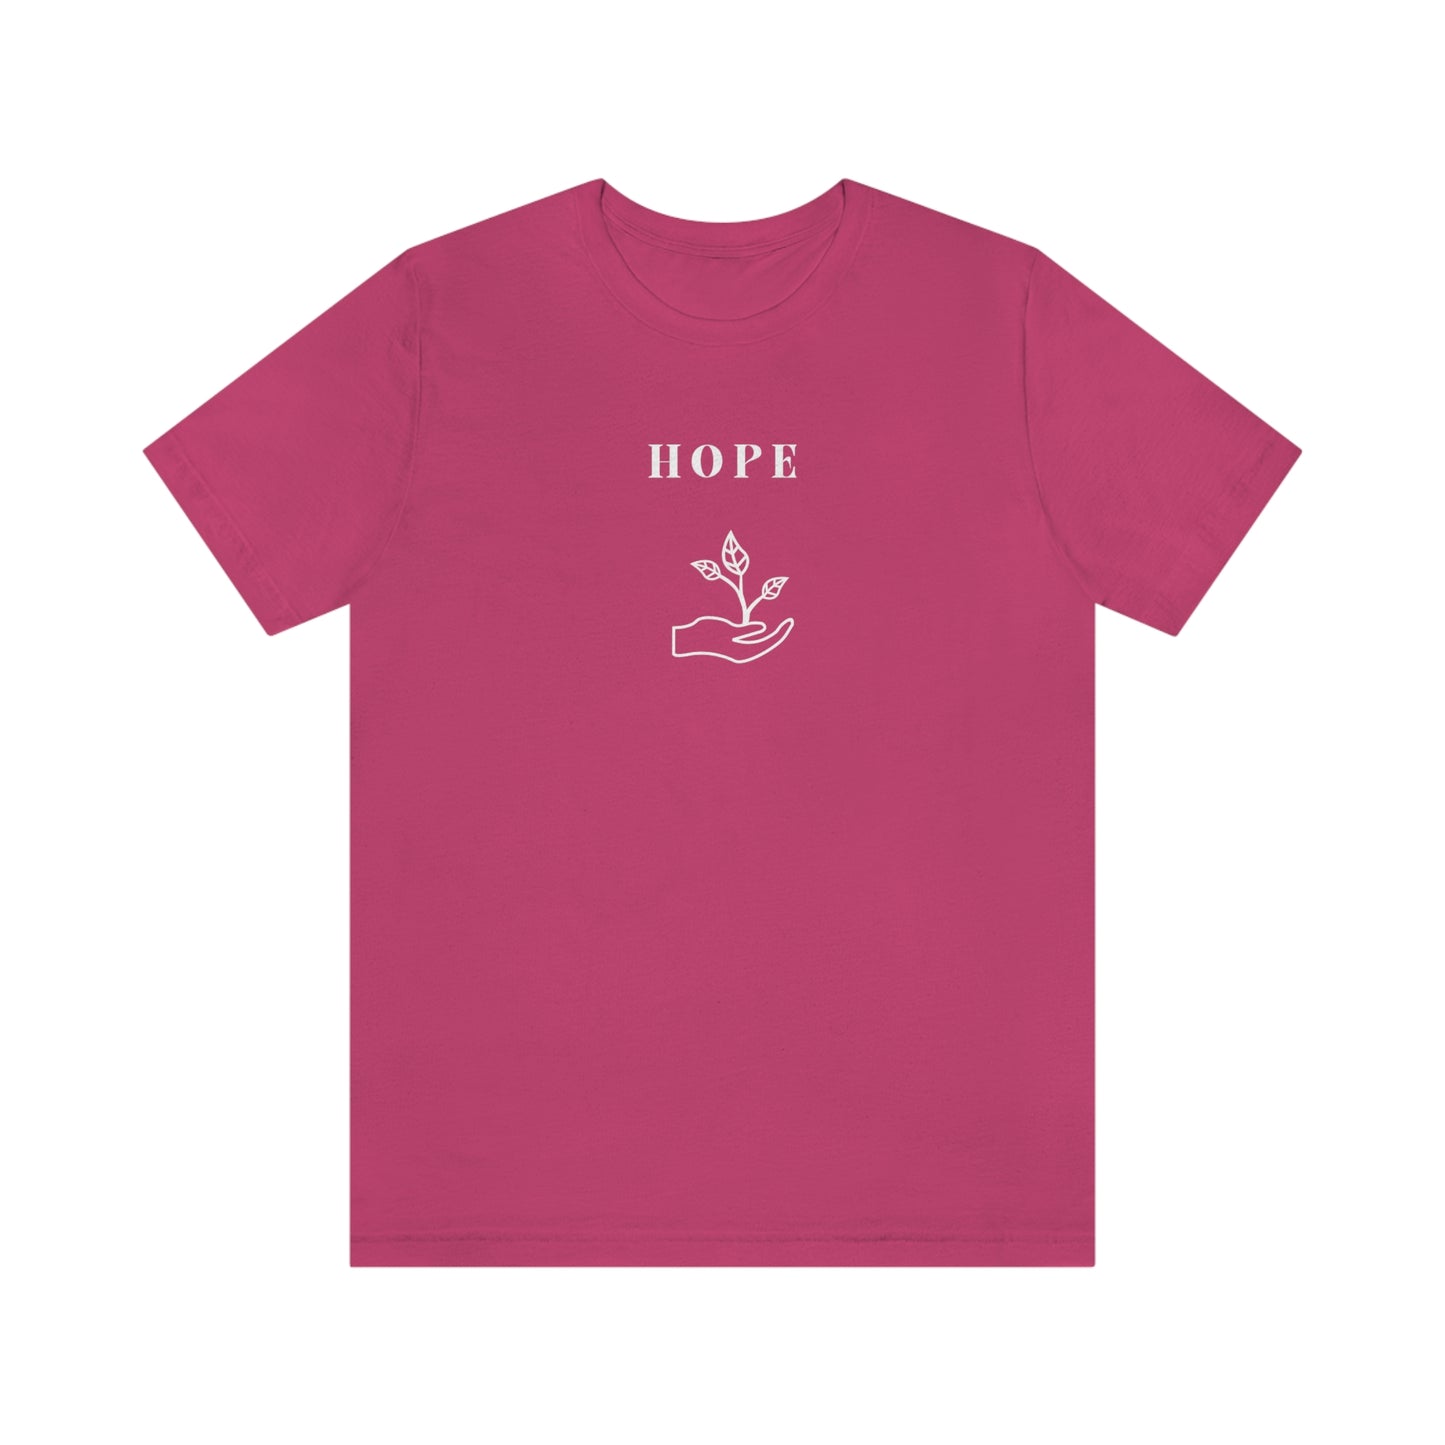 Hope inspirational word t shirts, tshirts that encourage t shirts for friends gift t shirt gifts for loved ones